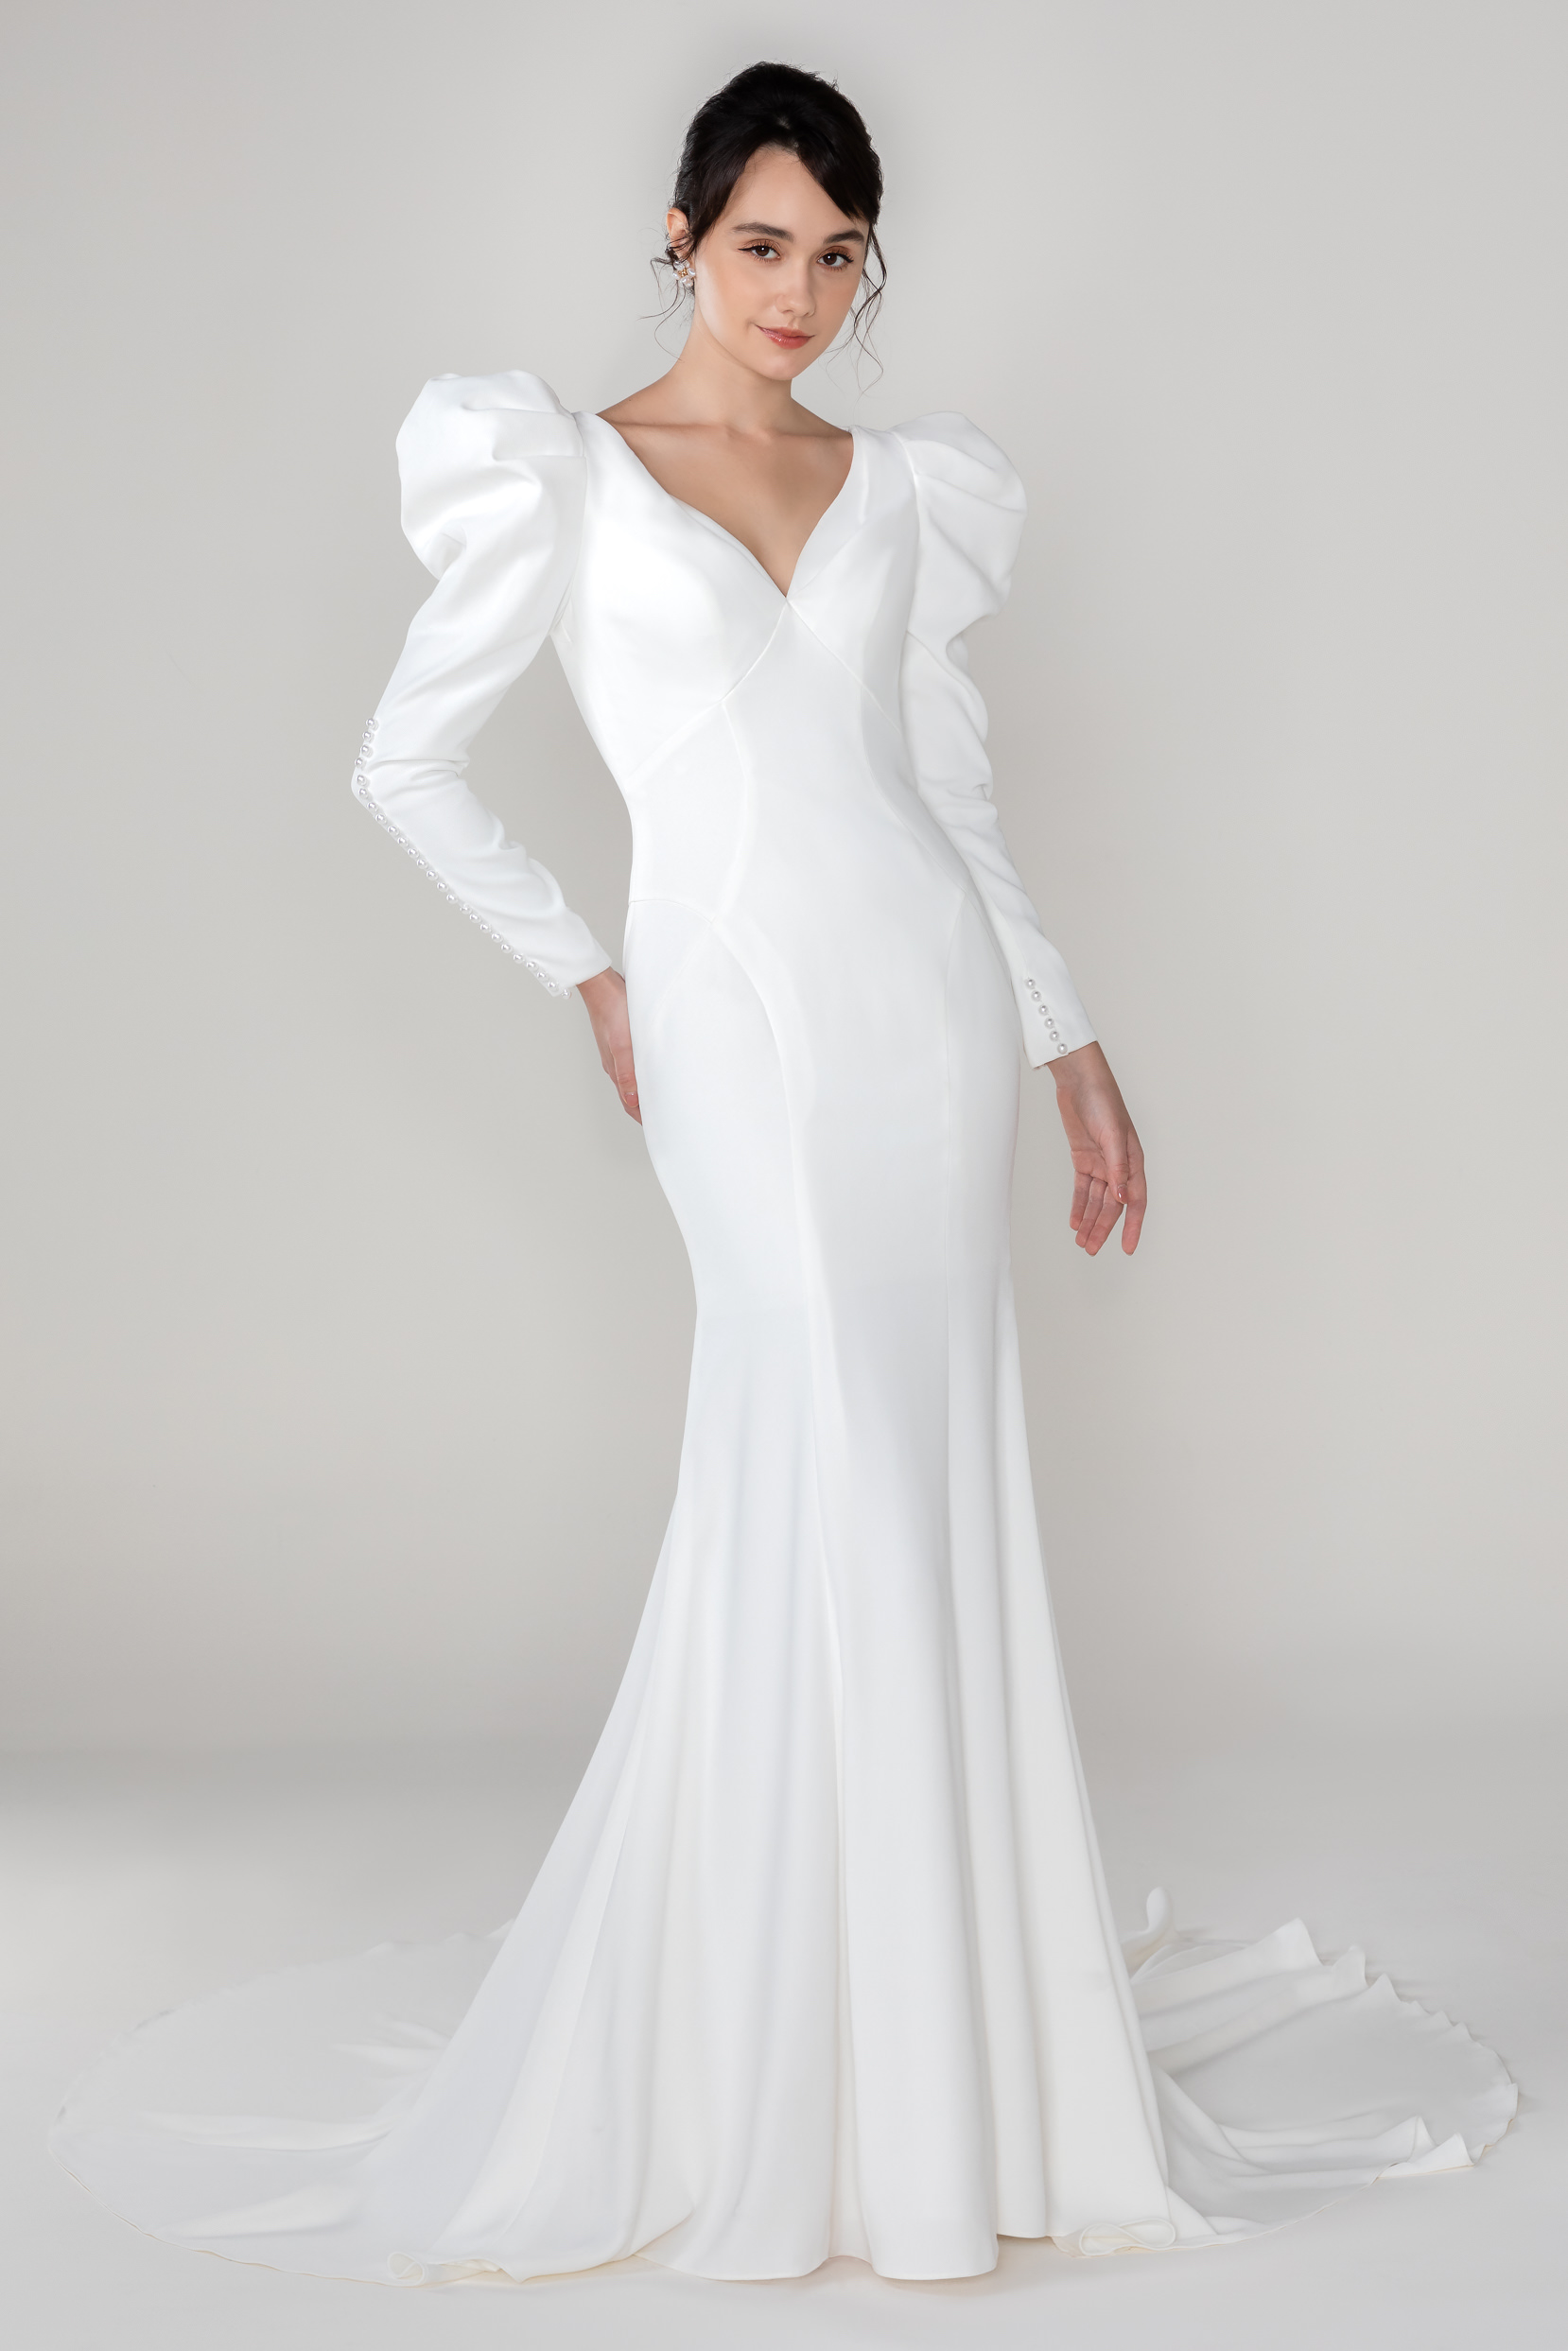 Classic Wedding Dresses by Cocomelody 2022 -CW2486 | LOUISA